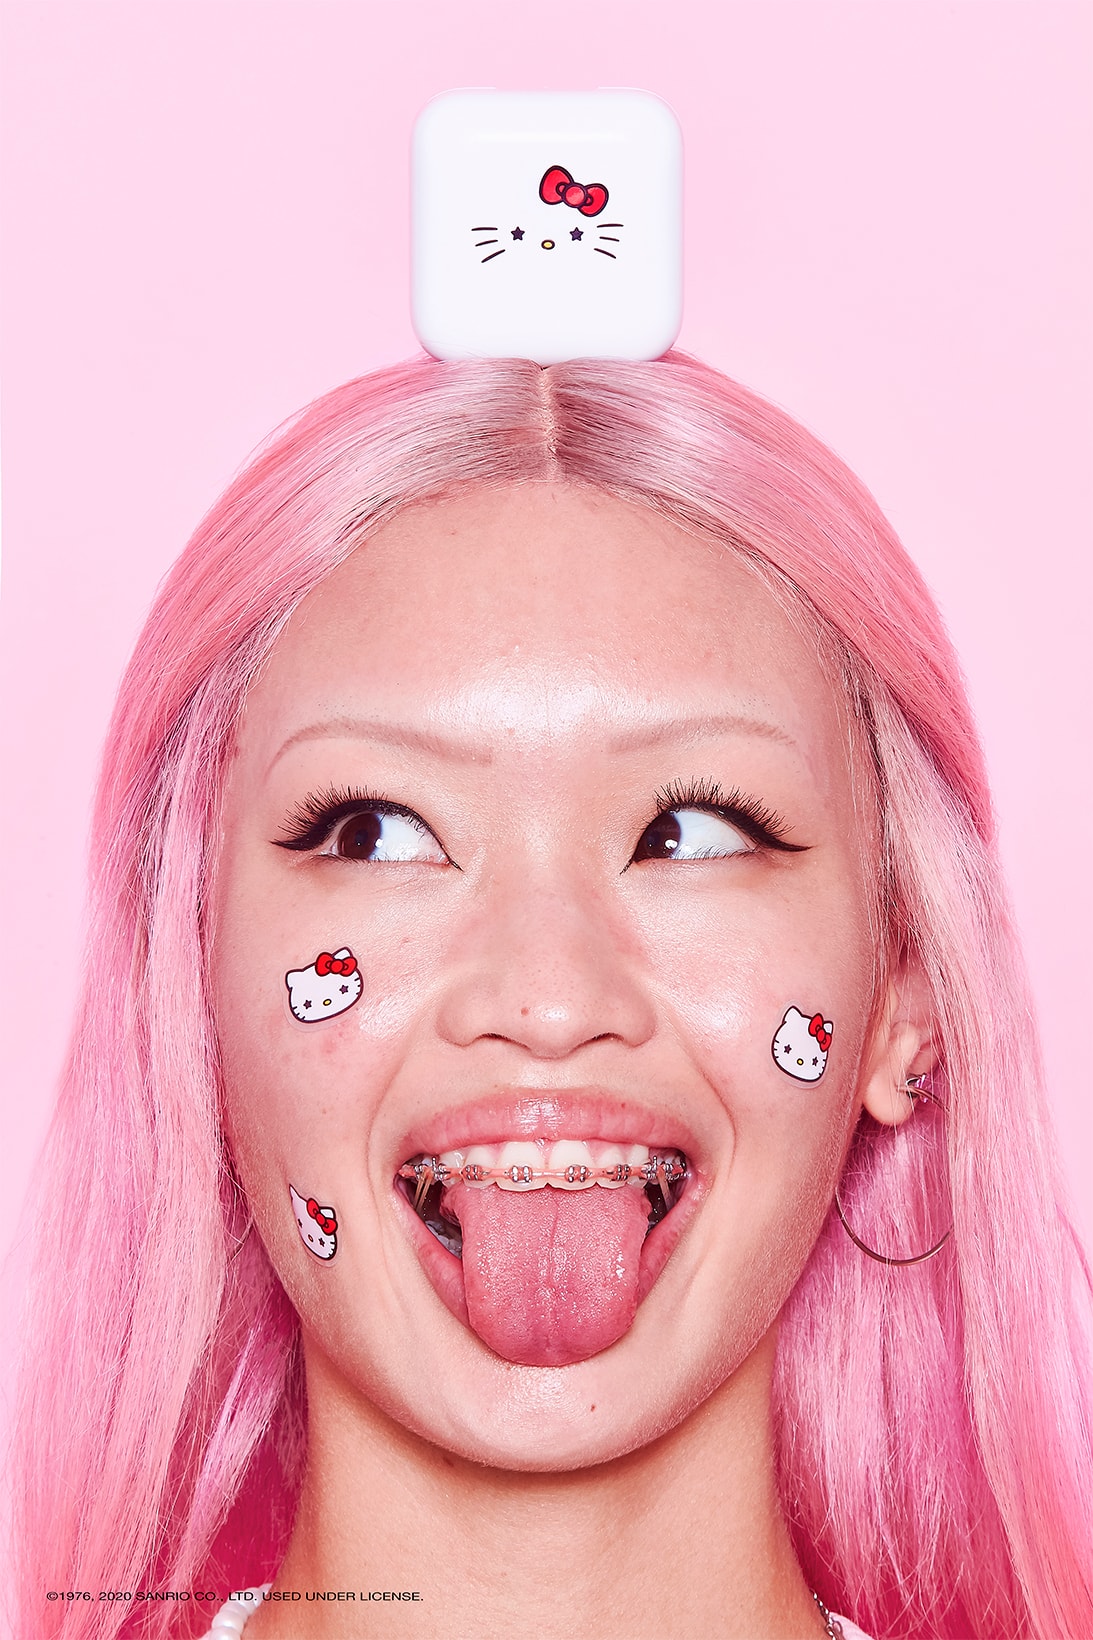 Hello Kitty & Starface Collab Once Again With a Limited-Edition Launch